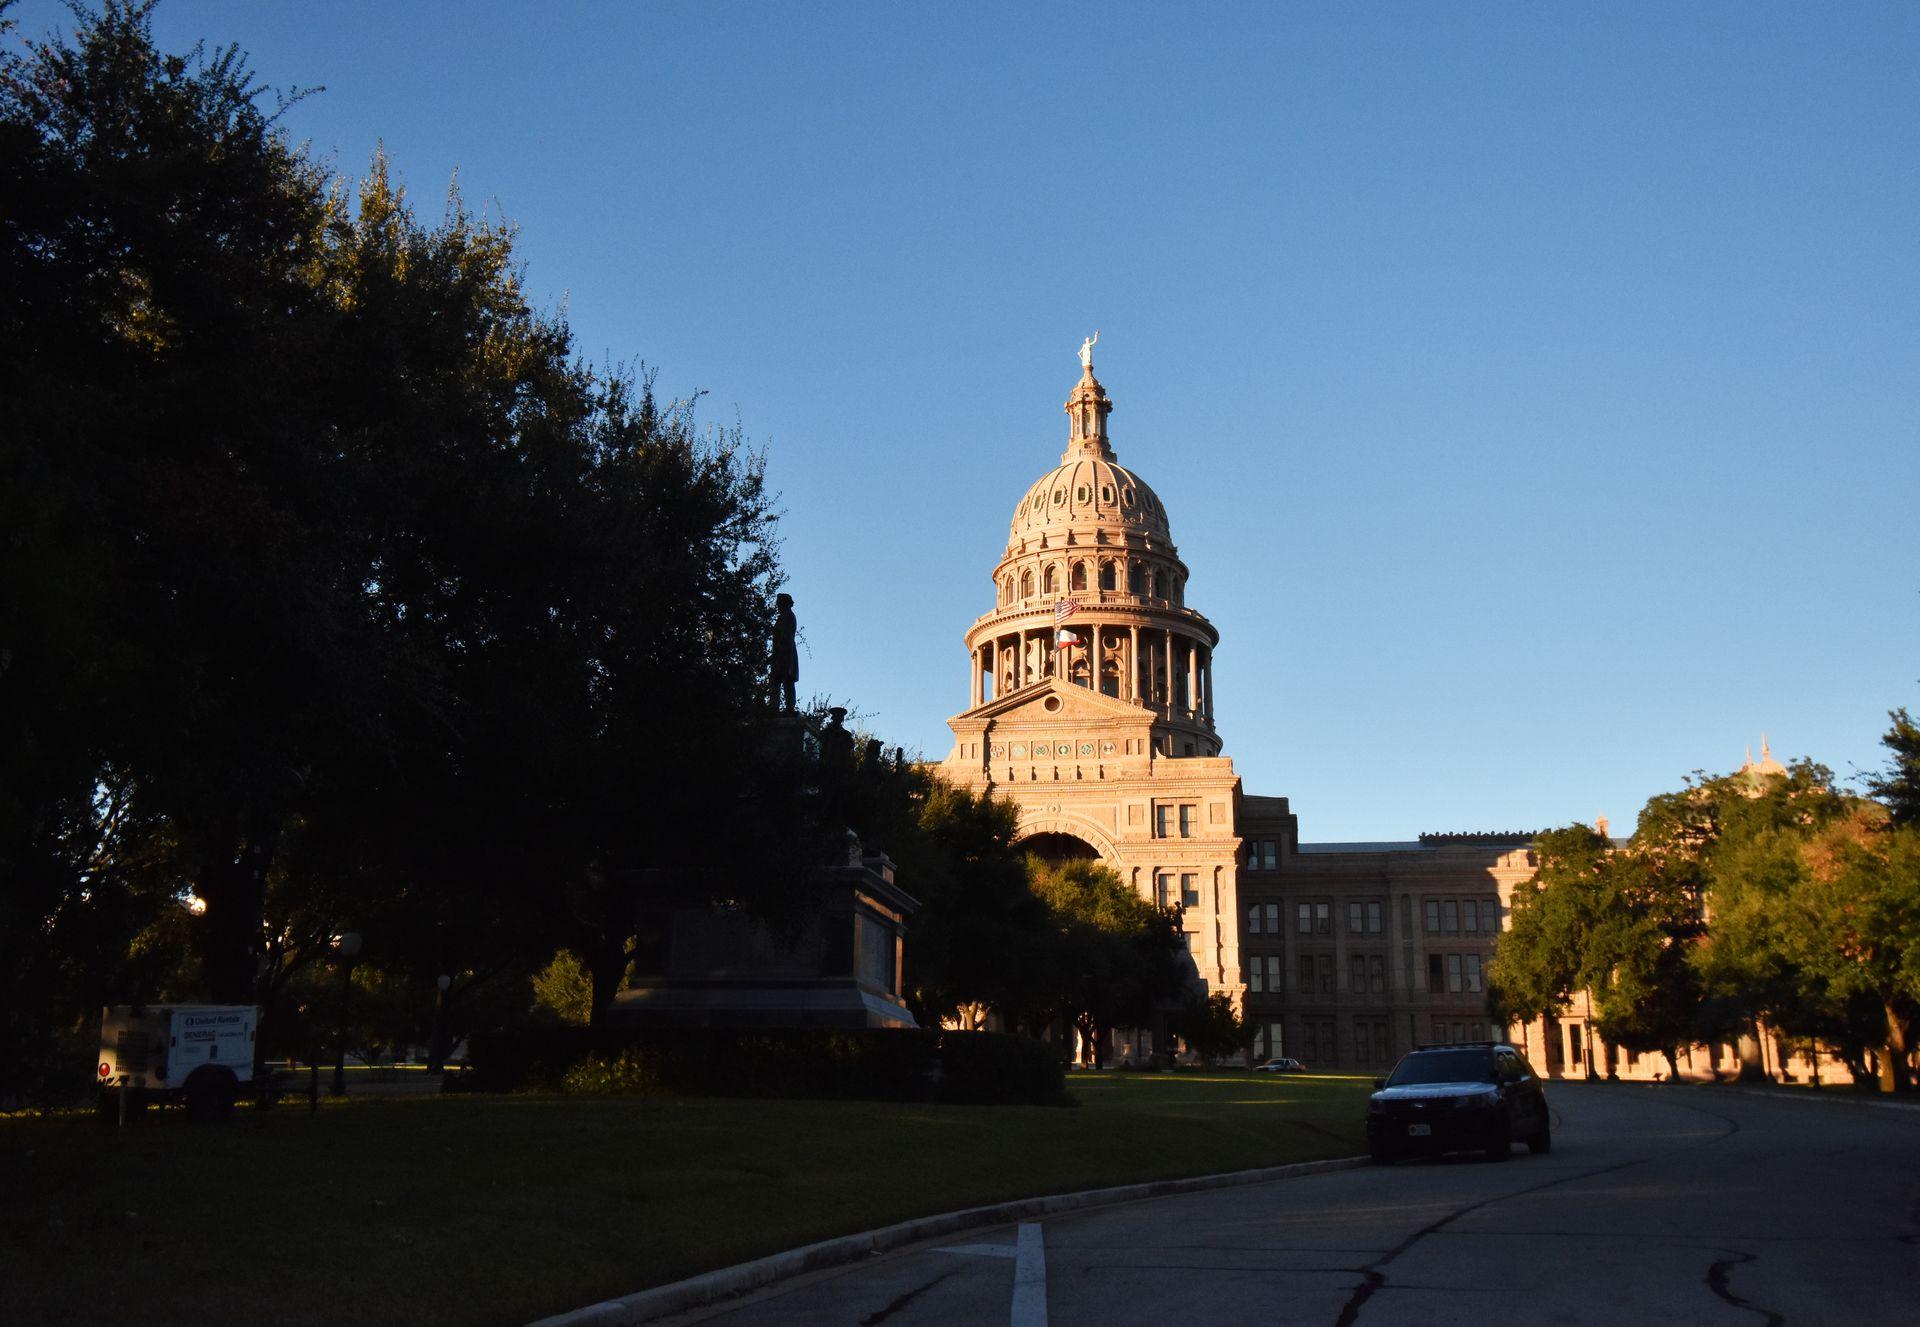 A view of the Texas State Capitol Building.